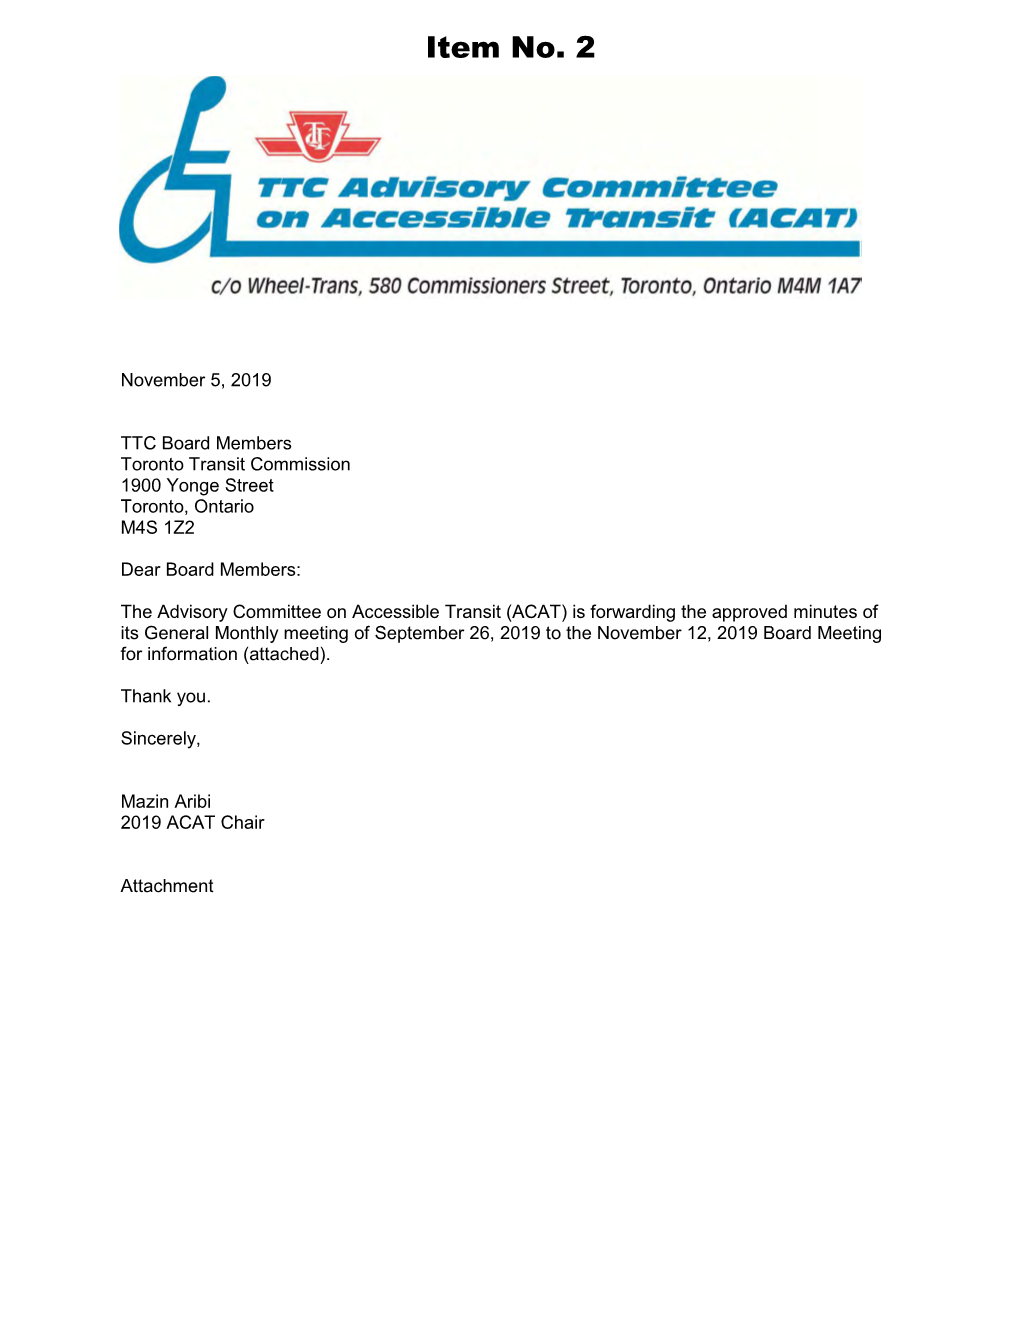 ACAT) Is Forwarding the Approved Minutes of Its General Monthly Meeting of September 26, 2019 to the November 12, 2019 Board Meeting for Information (Attached)